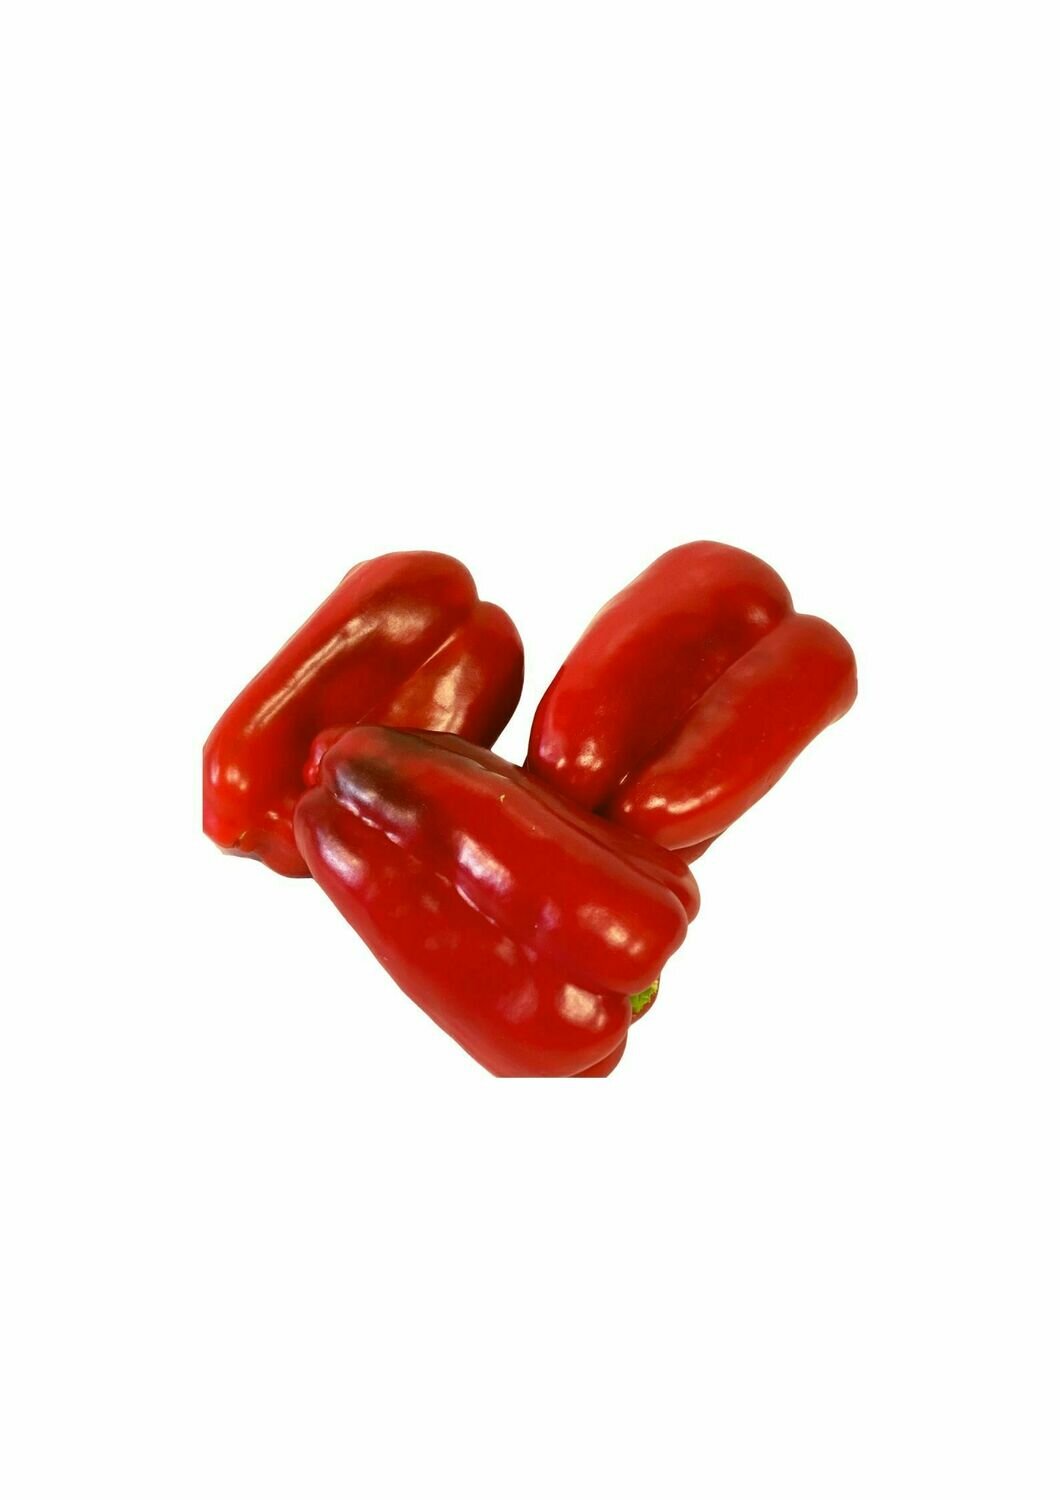 CAPSICUM RED Med Size (Each)